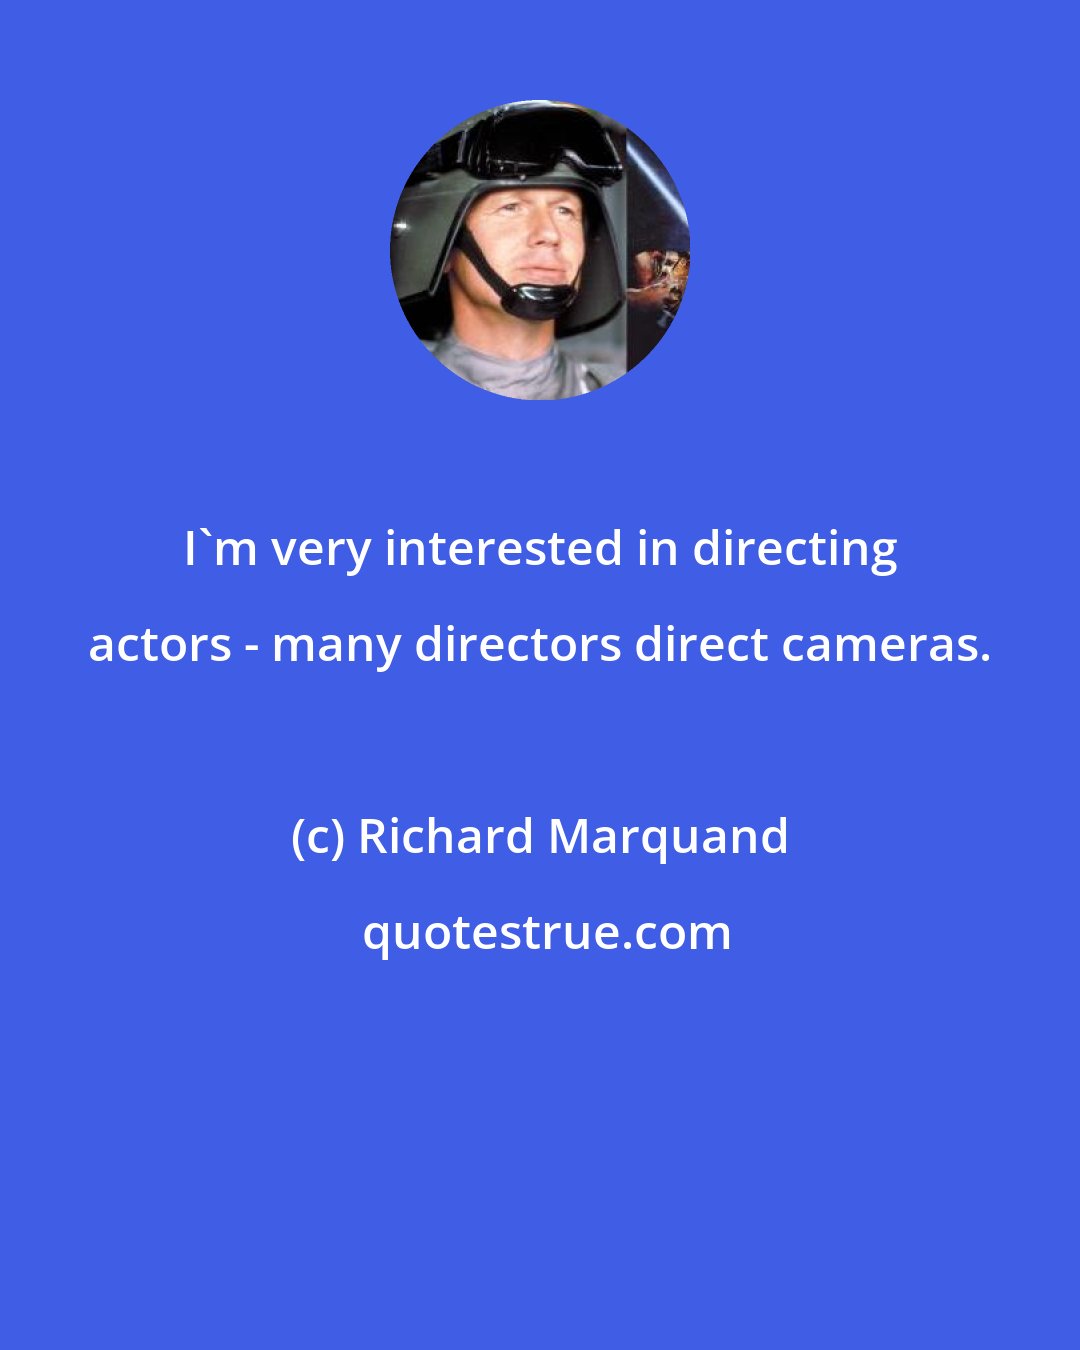 Richard Marquand: I'm very interested in directing actors - many directors direct cameras.